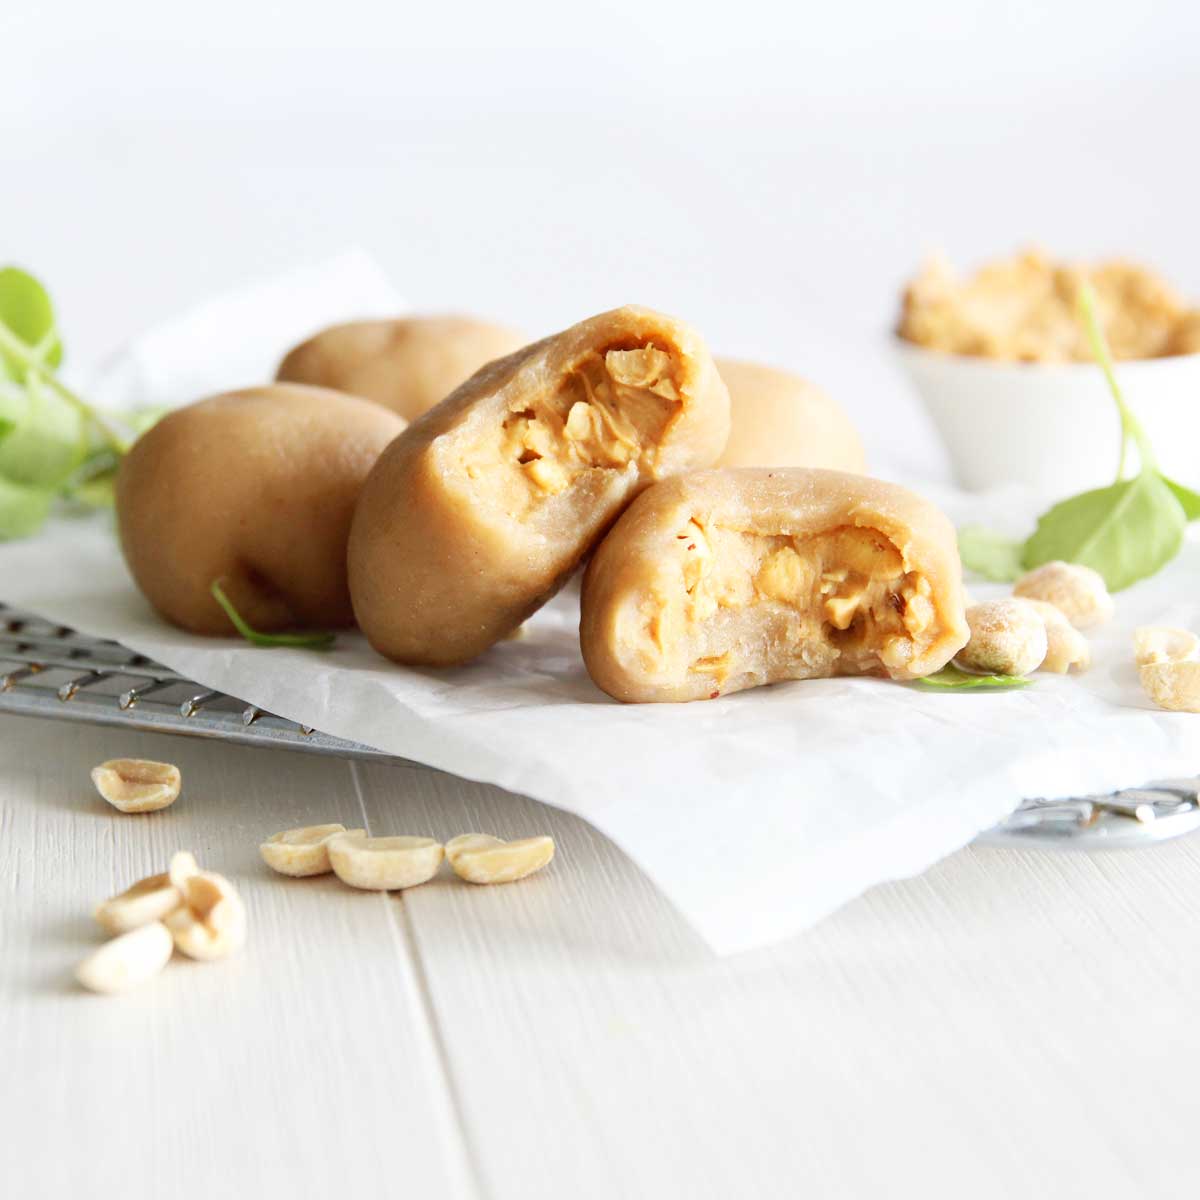 Chinese-Styled Peanut Butter Mochi Made in the Microwave - Walnut Butter Mooncakes